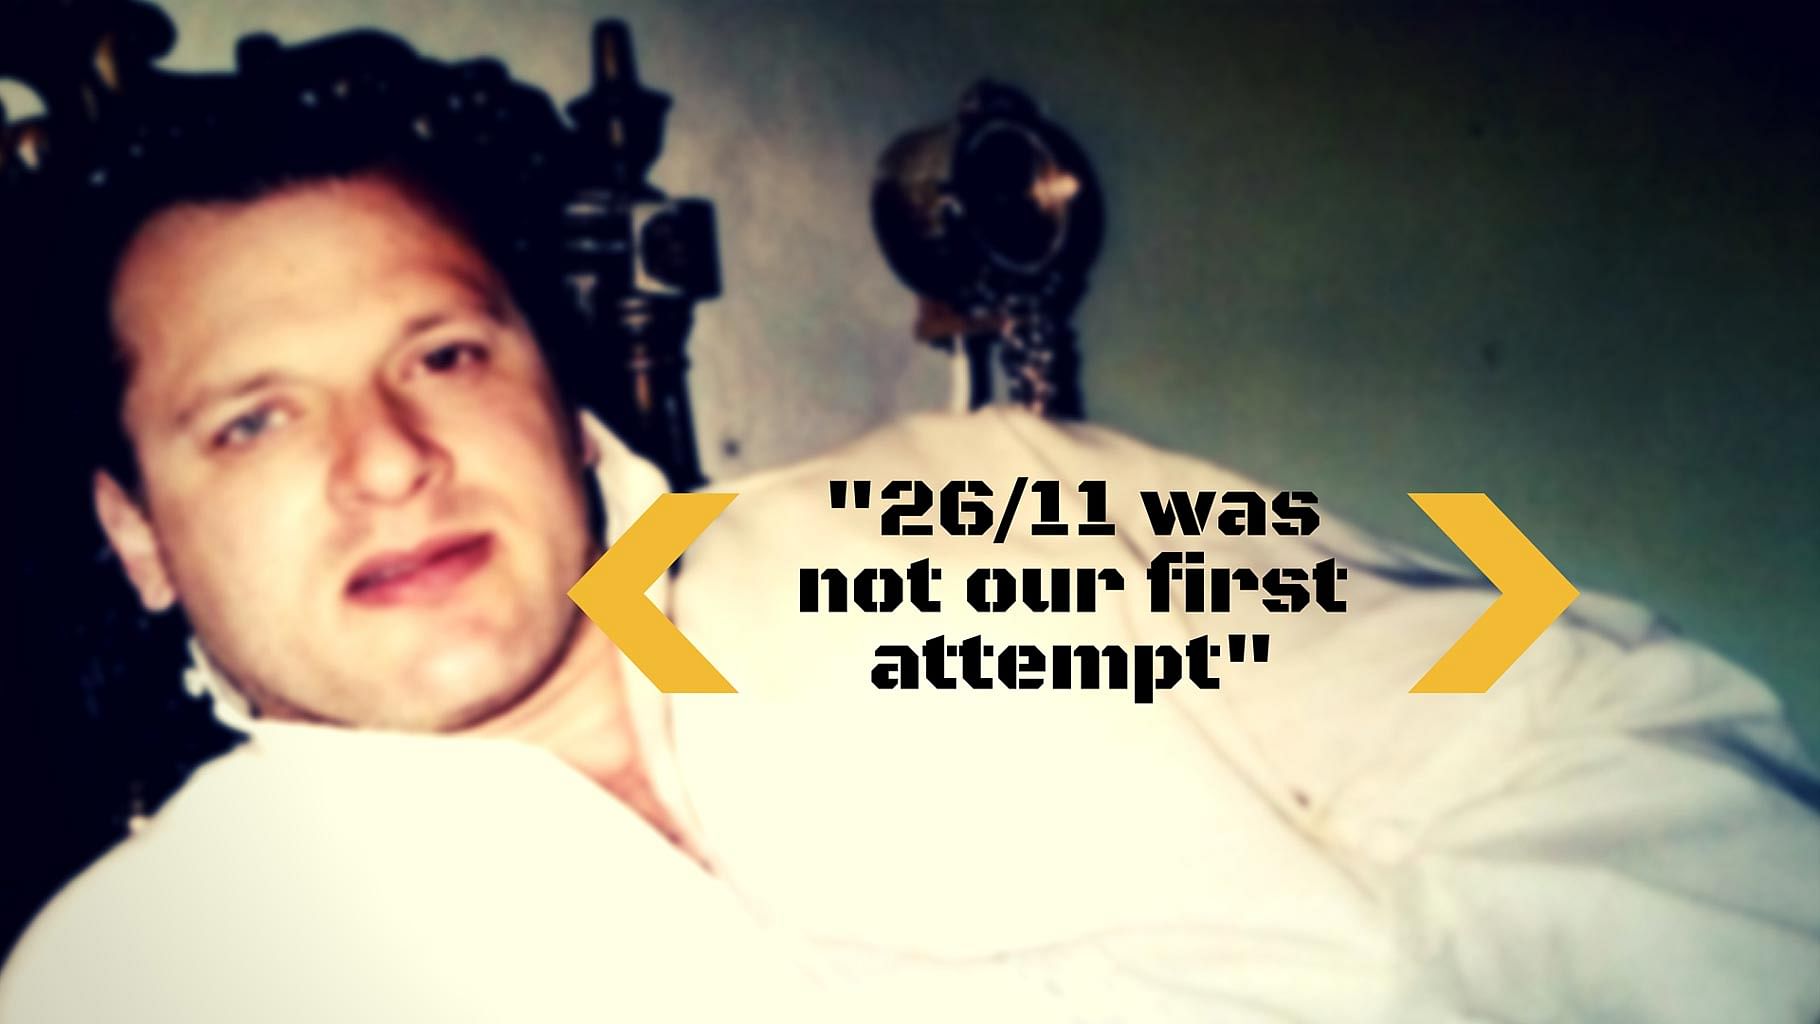 David Coleman Headley gives India the ammo it needs. (Photo: <b>The Quint</b>)